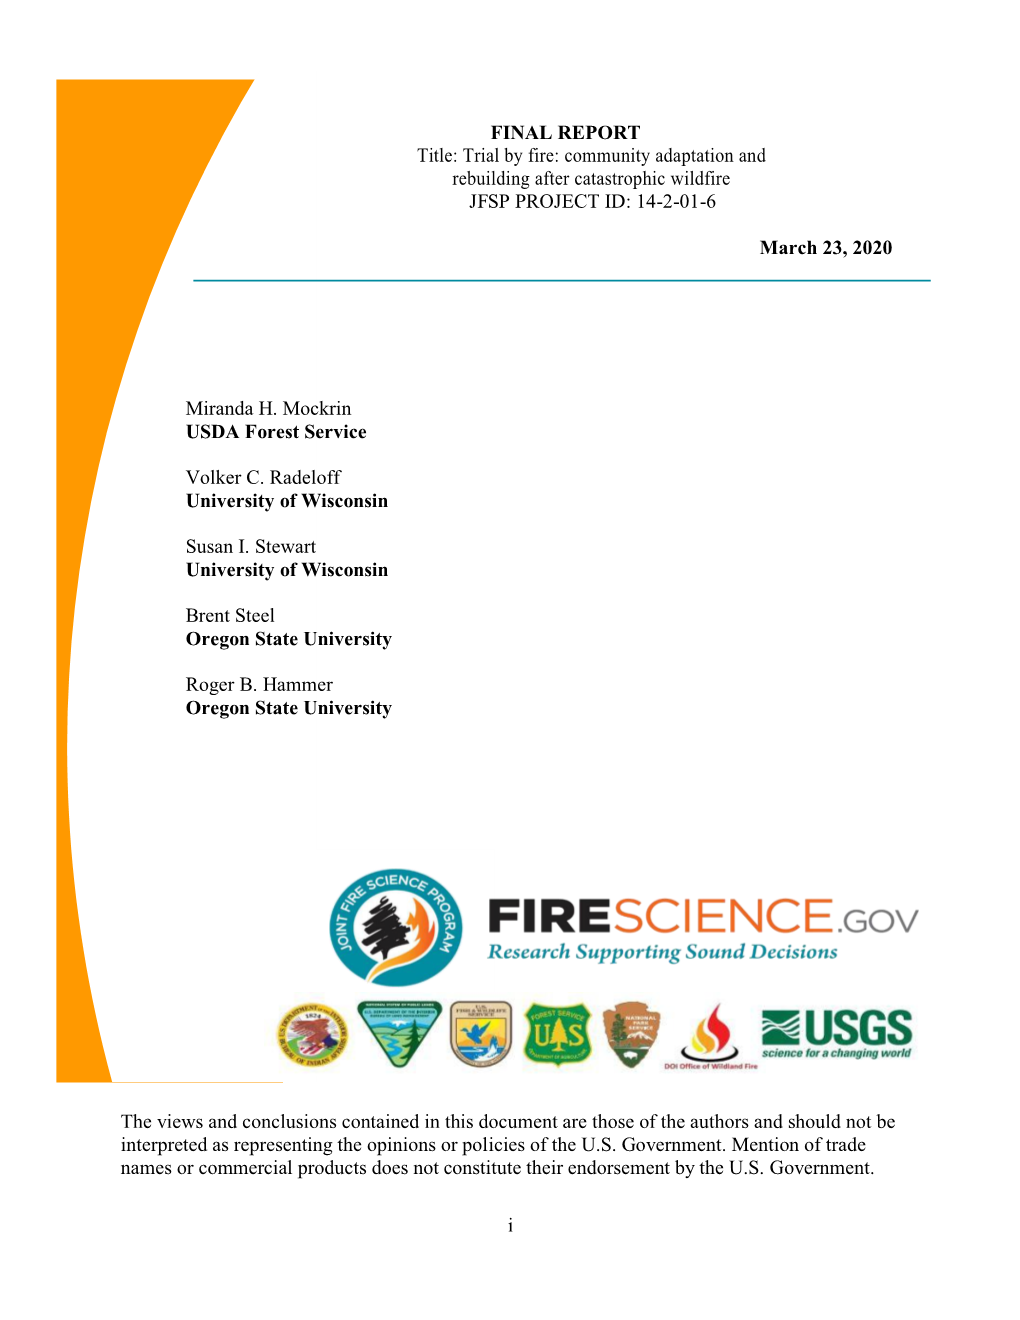 Trial by Fire: Community Adaptation and Rebuilding After Catastrophic Wildfire JFSP PROJECT ID: 14-2-01-6